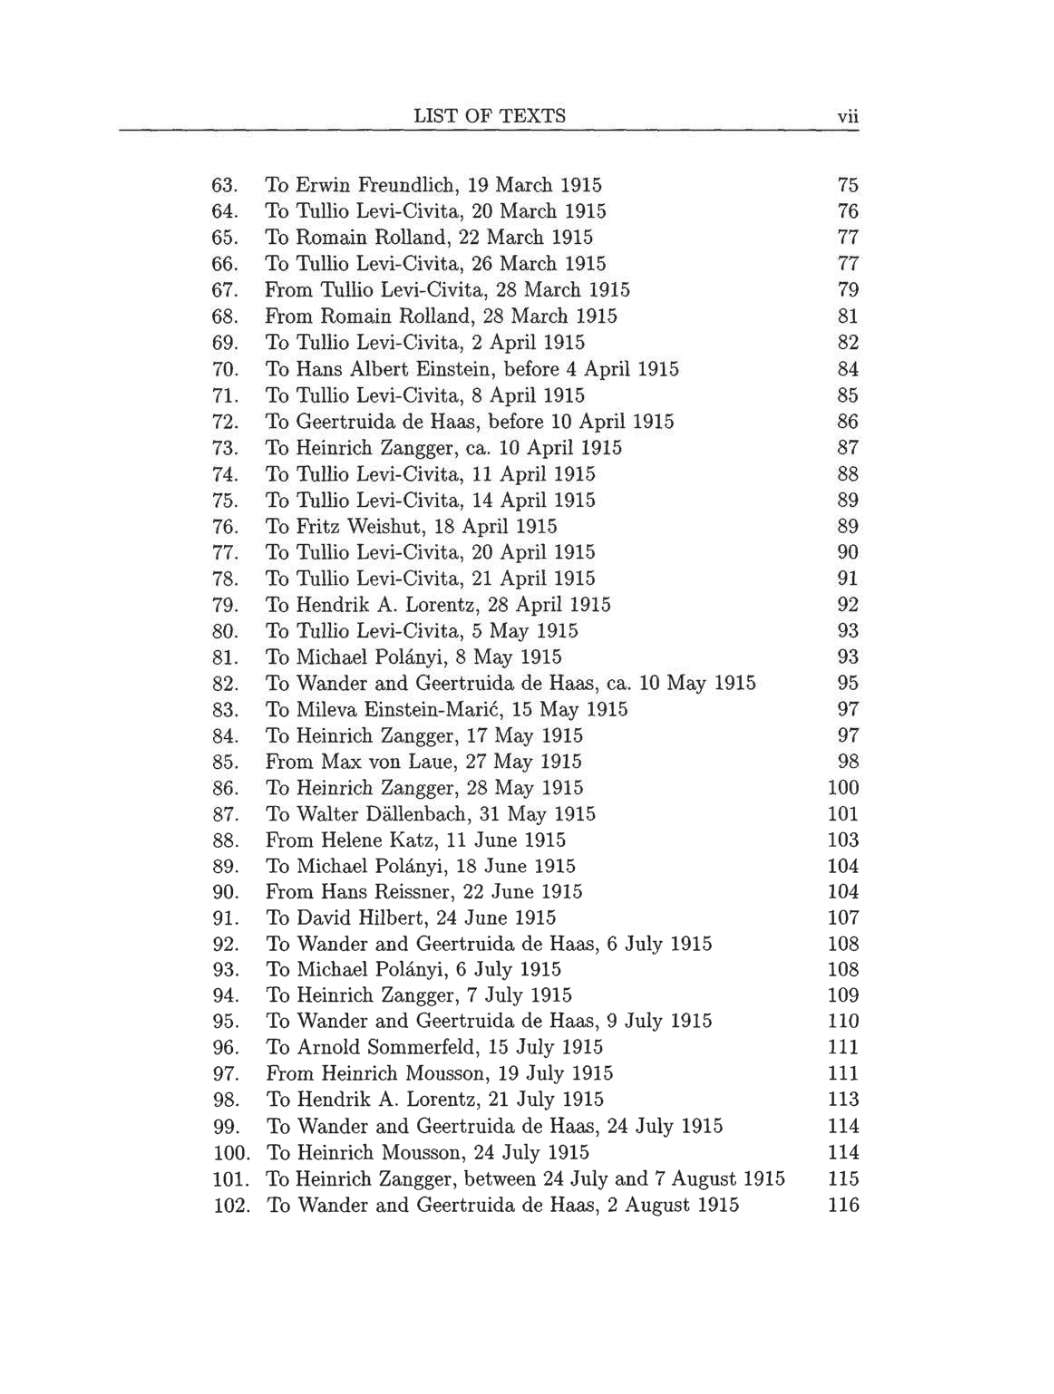 Volume 8: The Berlin Years: Correspondence, 1914-1918 (English translation supplement) page vii